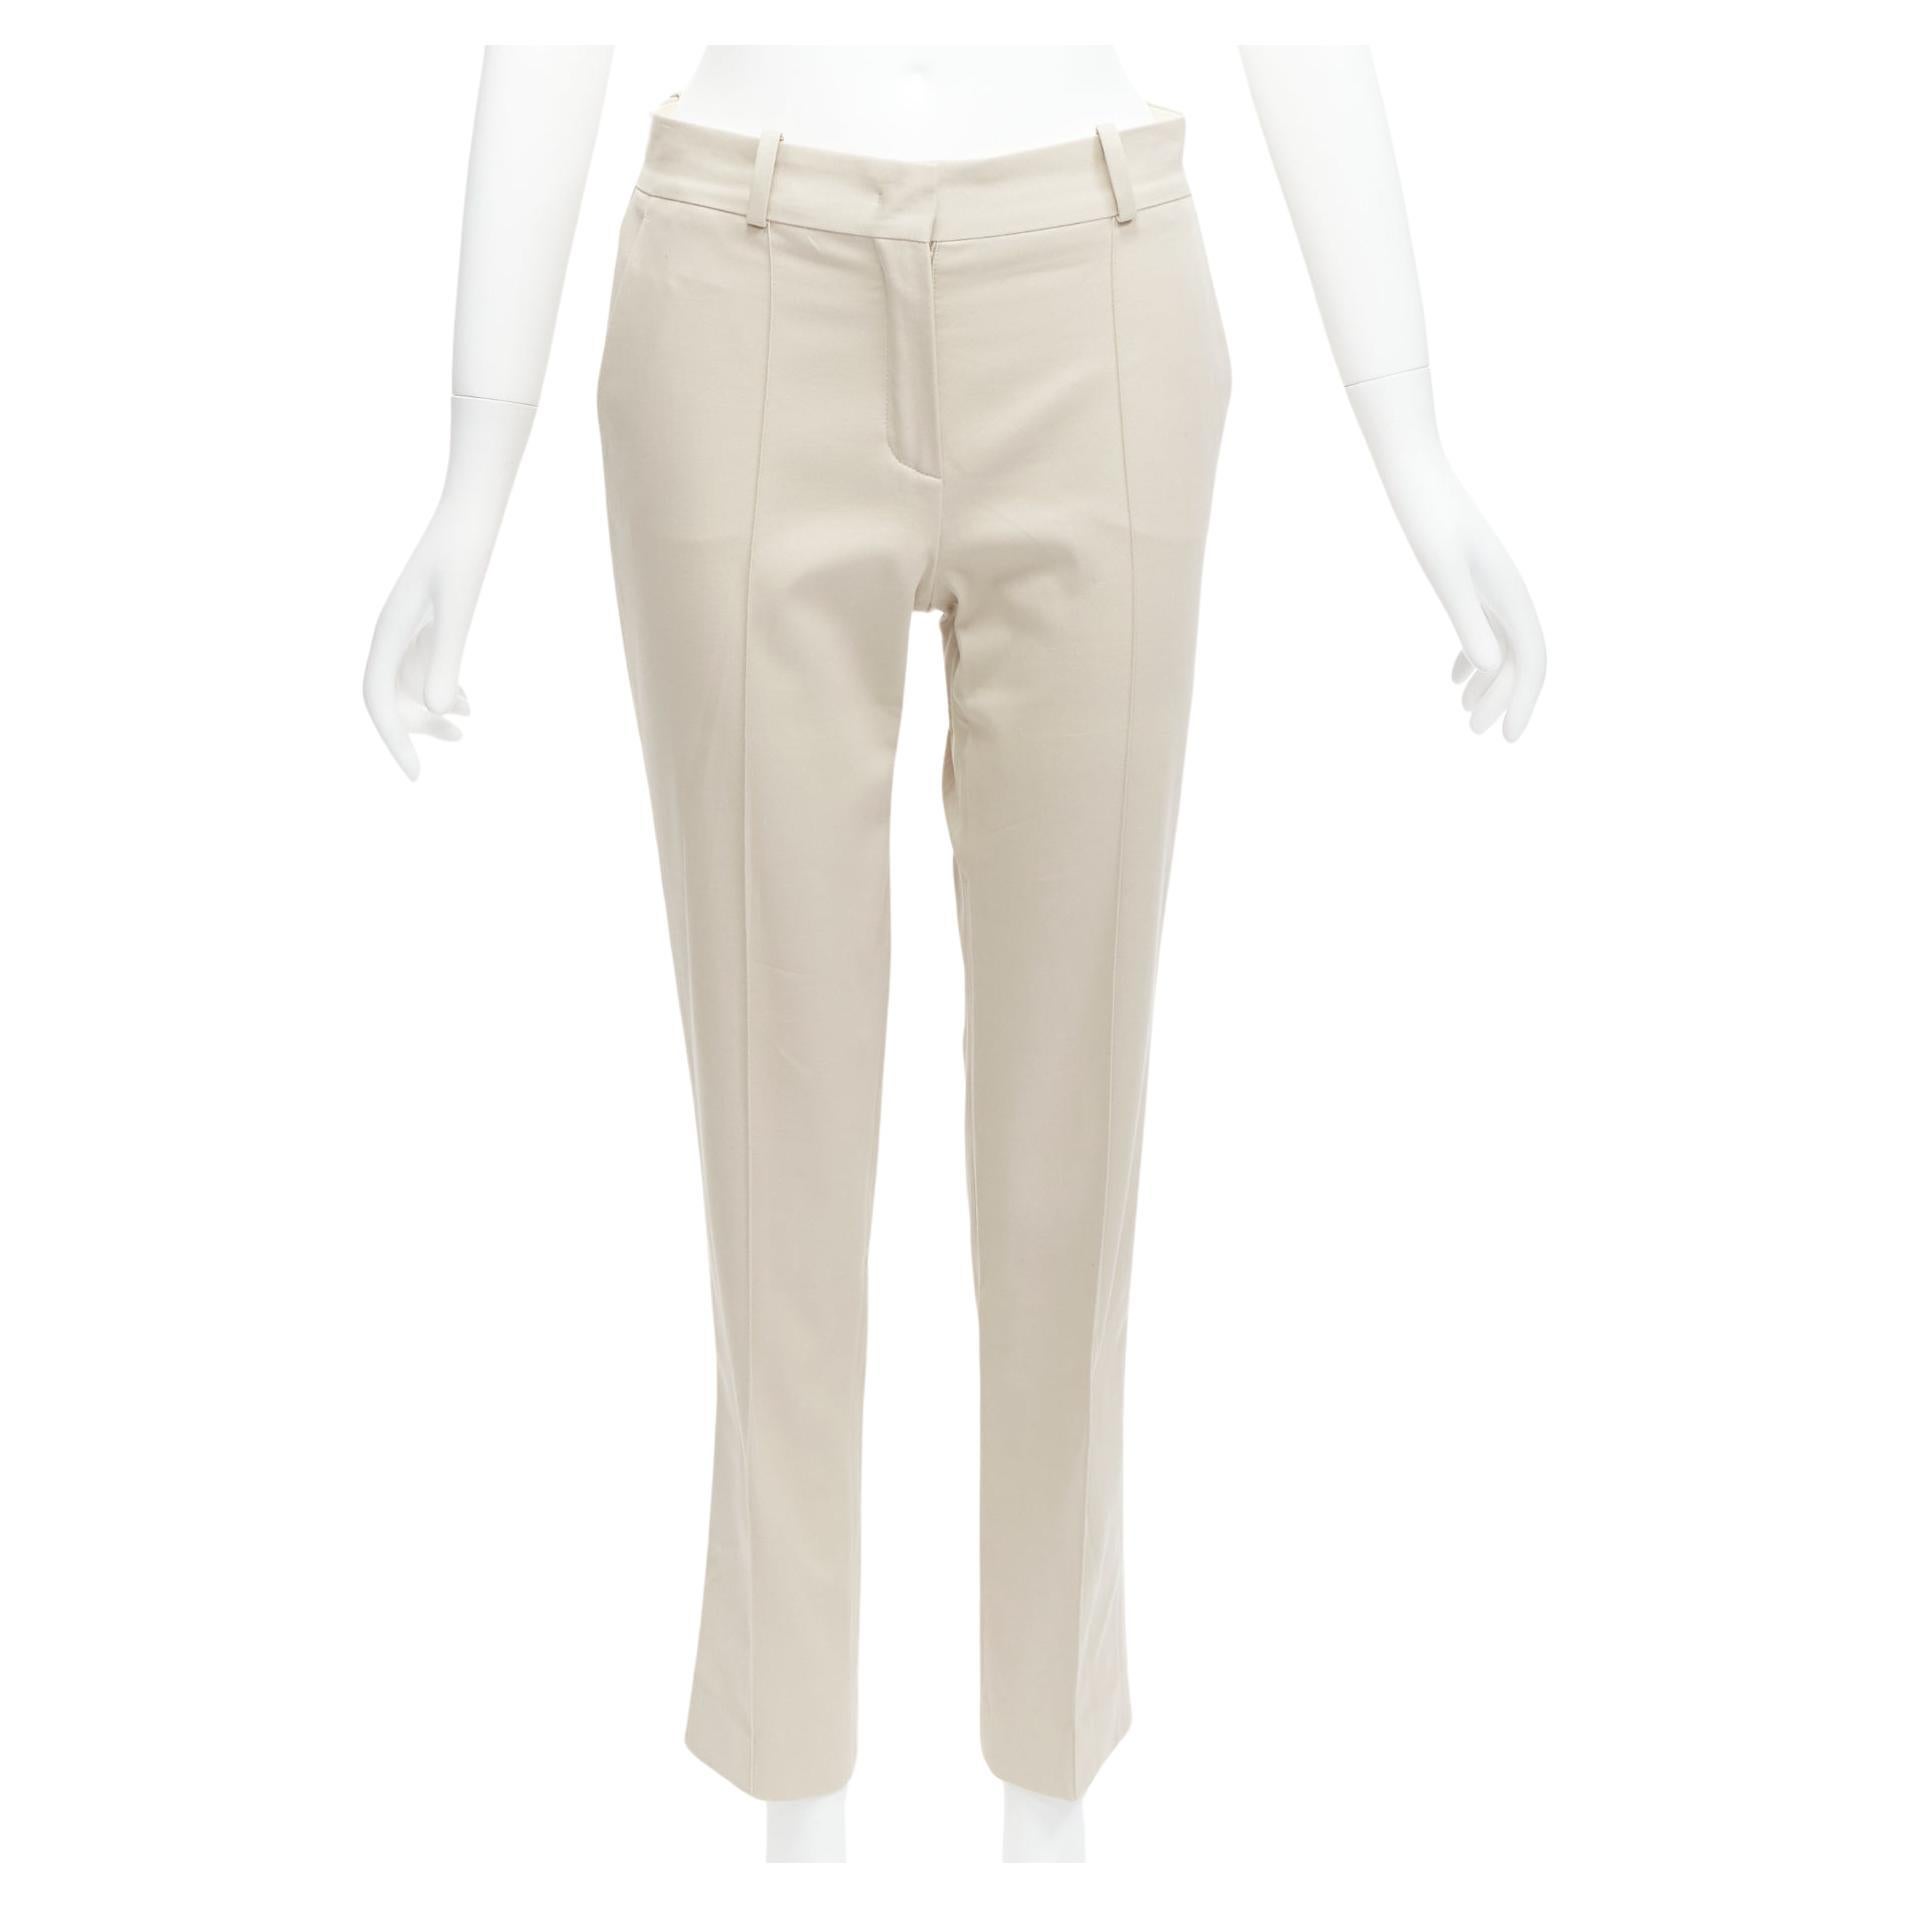 new LORO PIANA beige cotton blend mid waist classic tapered cropped pants